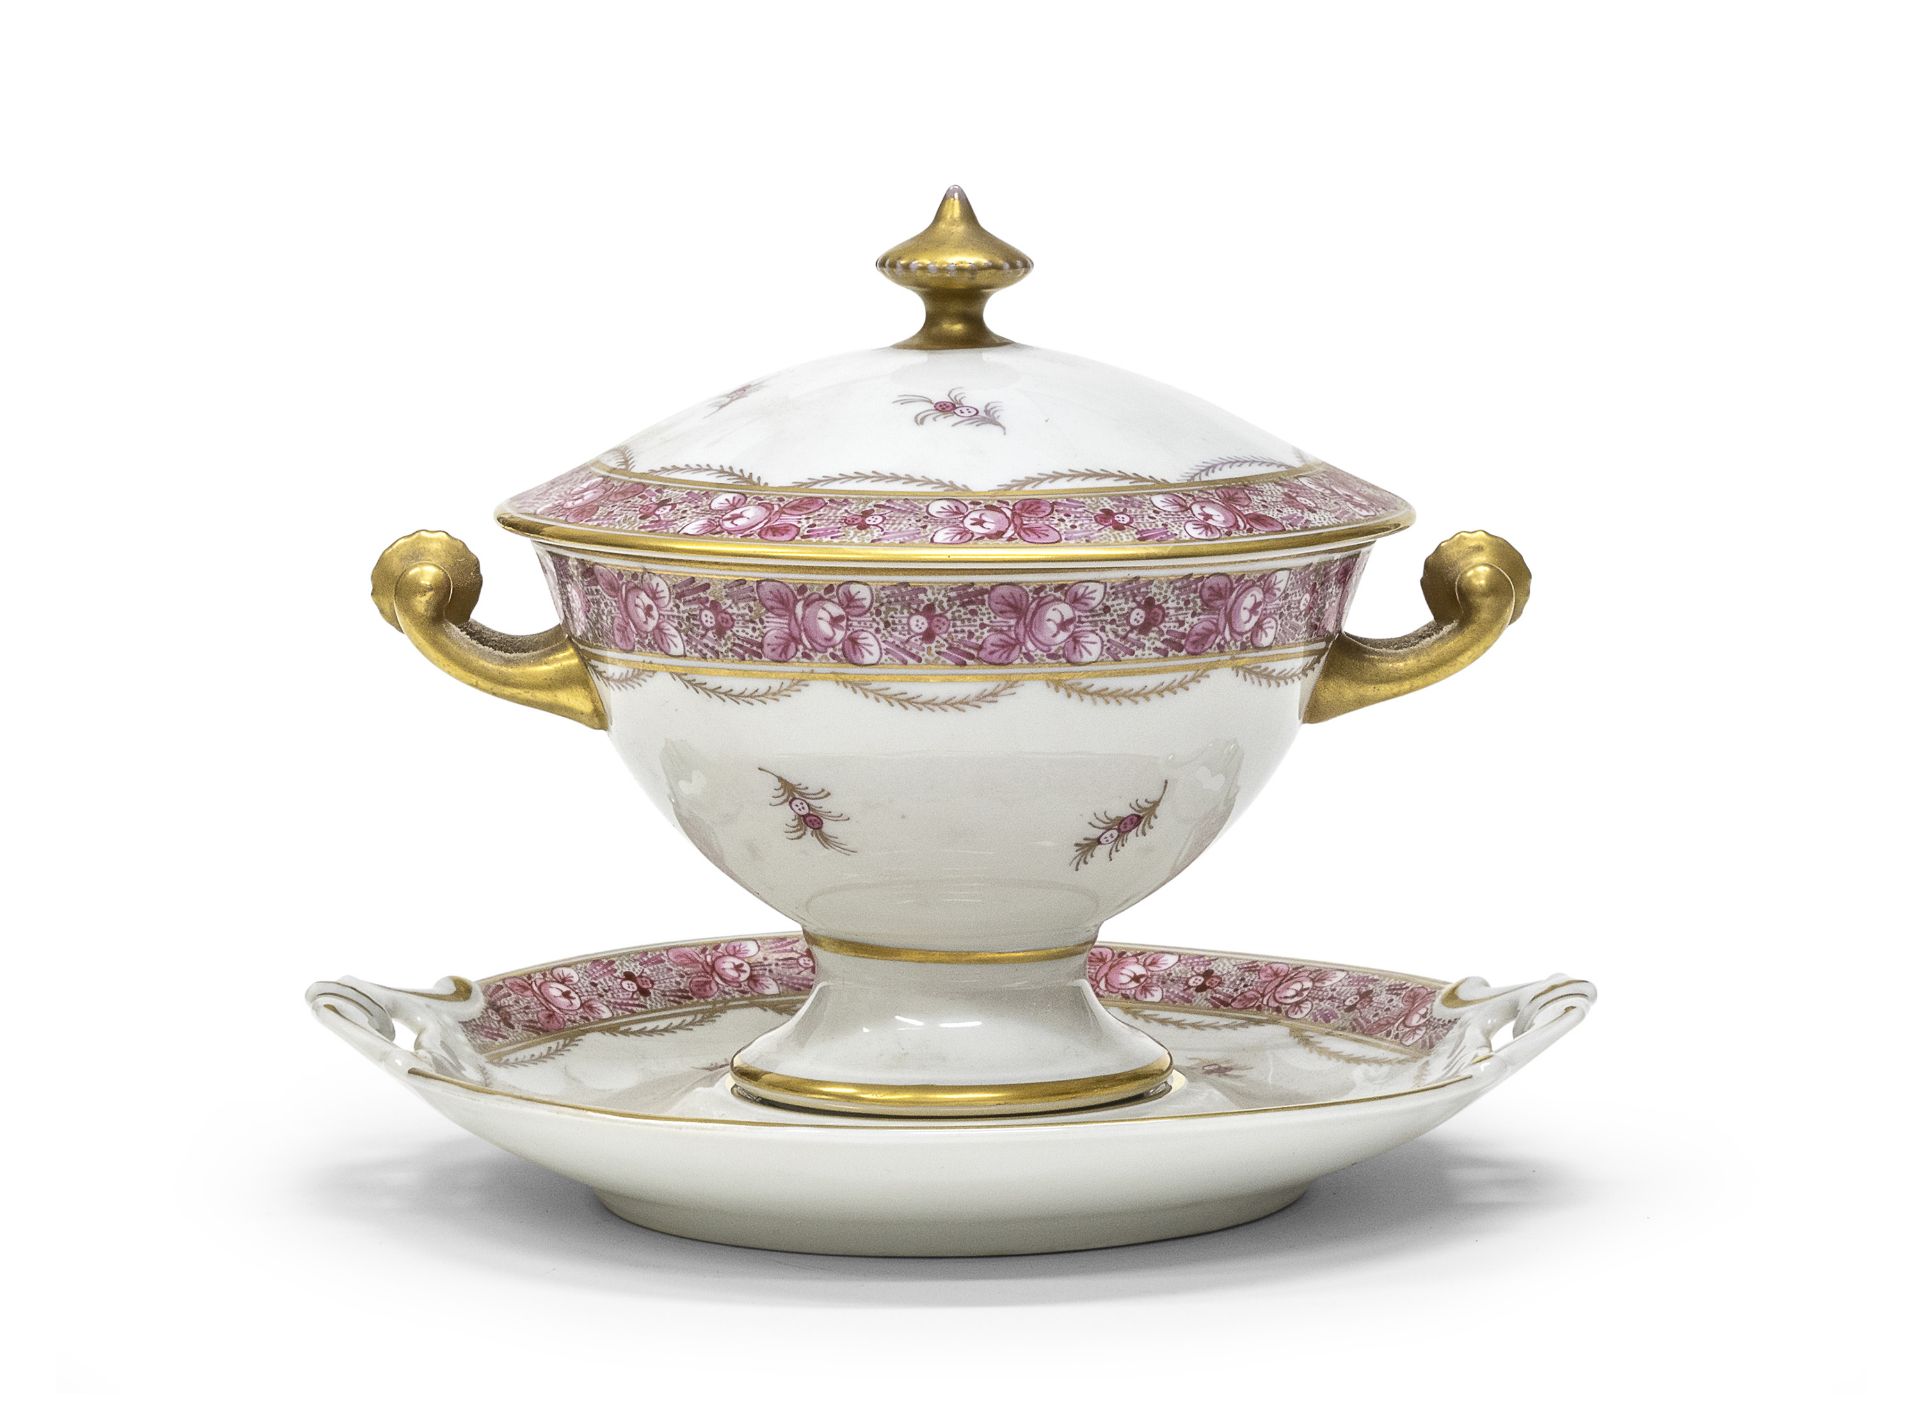 SMALL PORCELAIN TUREEN LIMOGES 20TH CENTURY